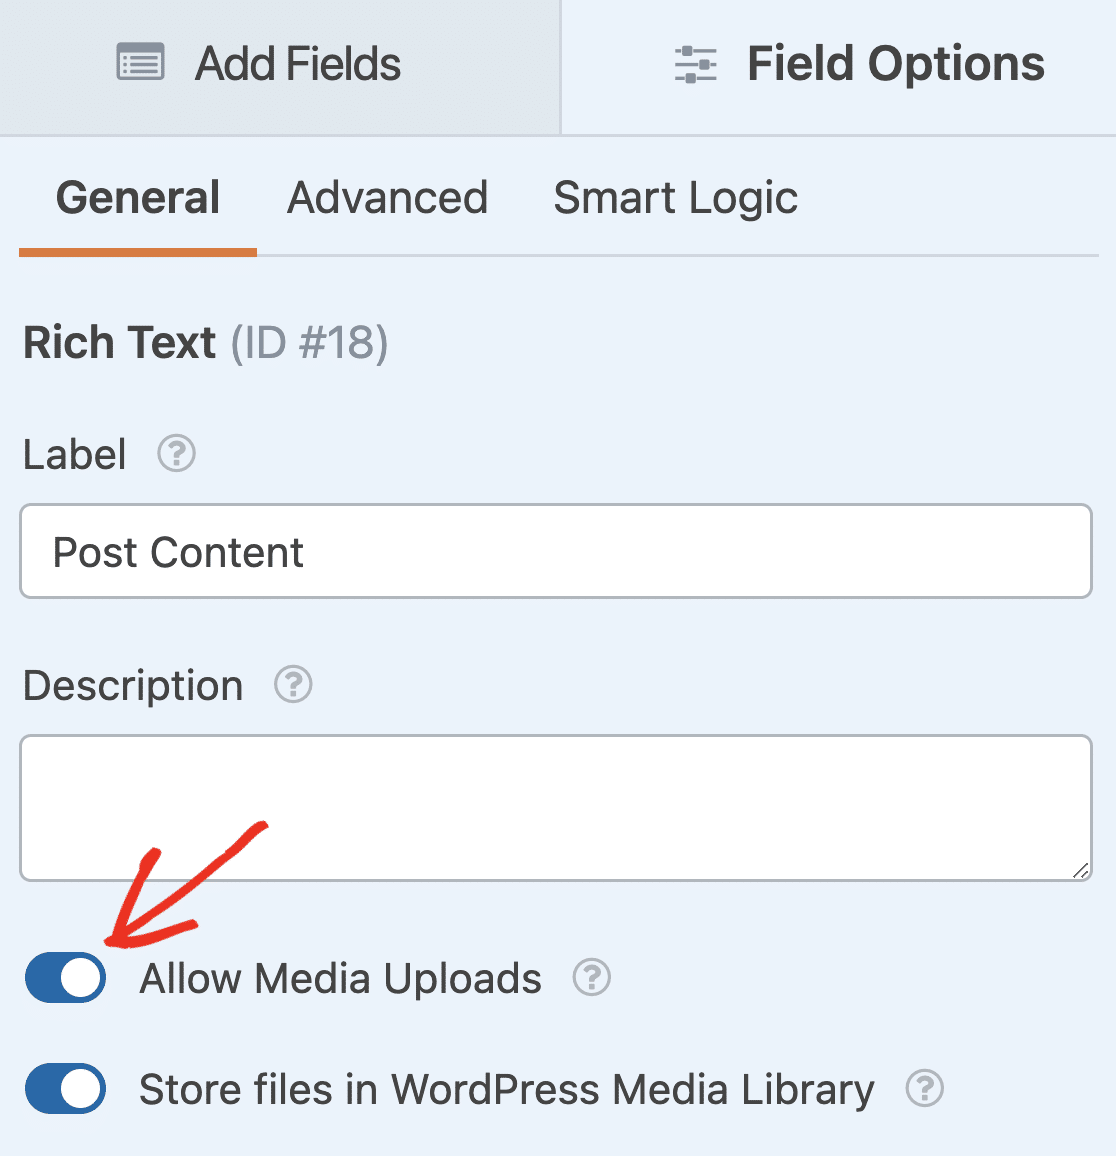 Turning on file uploads for the Rich Text field